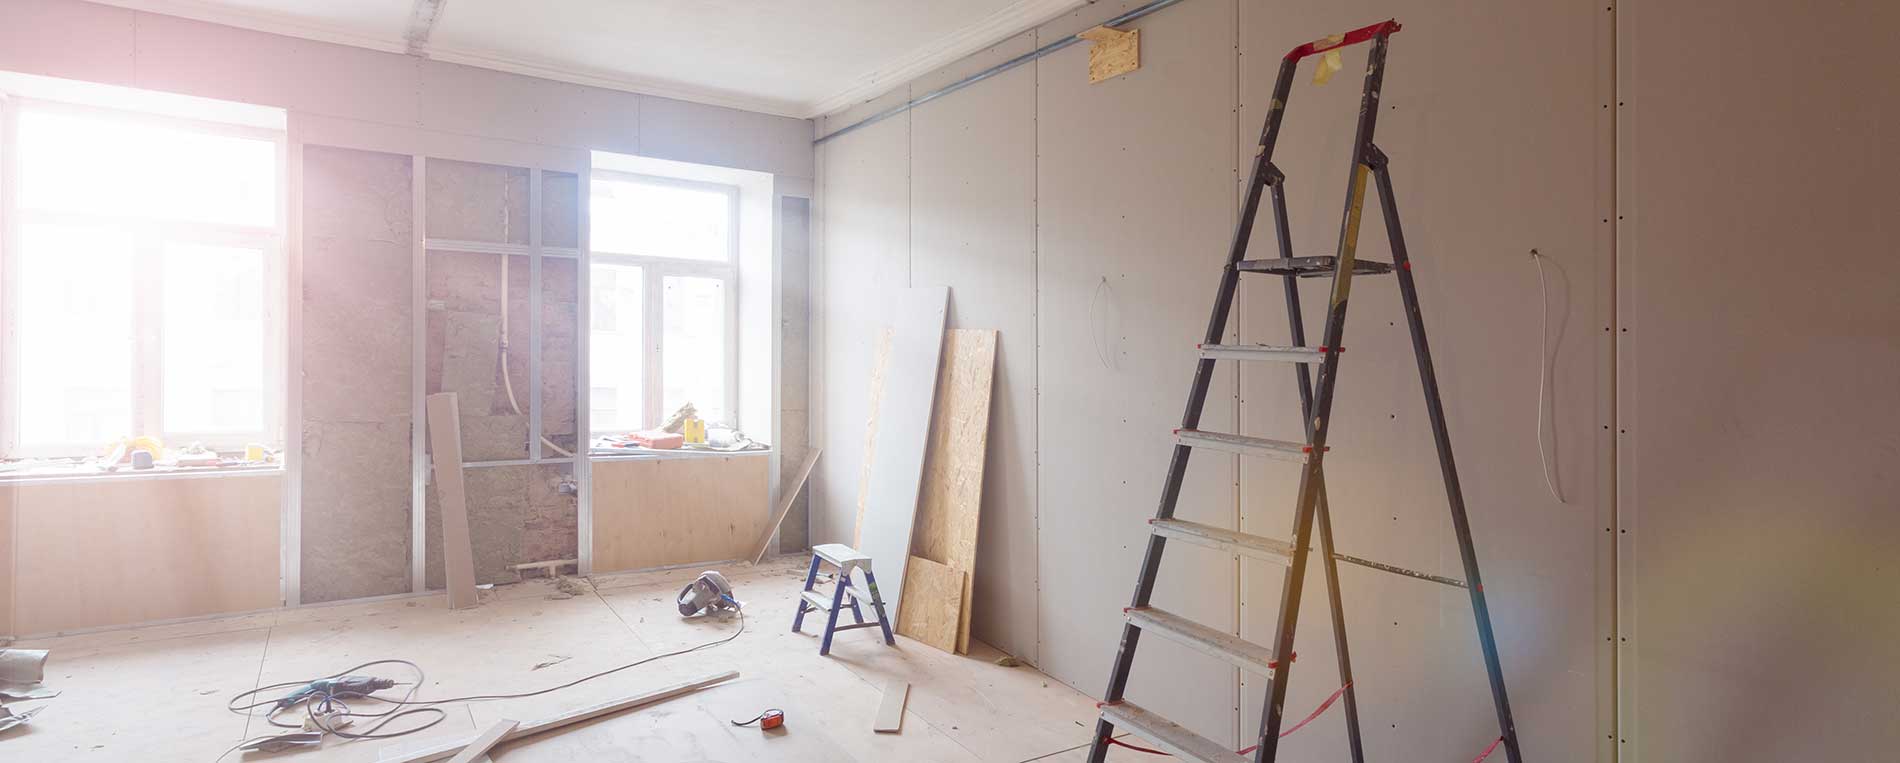 Using Drywall To Remodel Your Basement